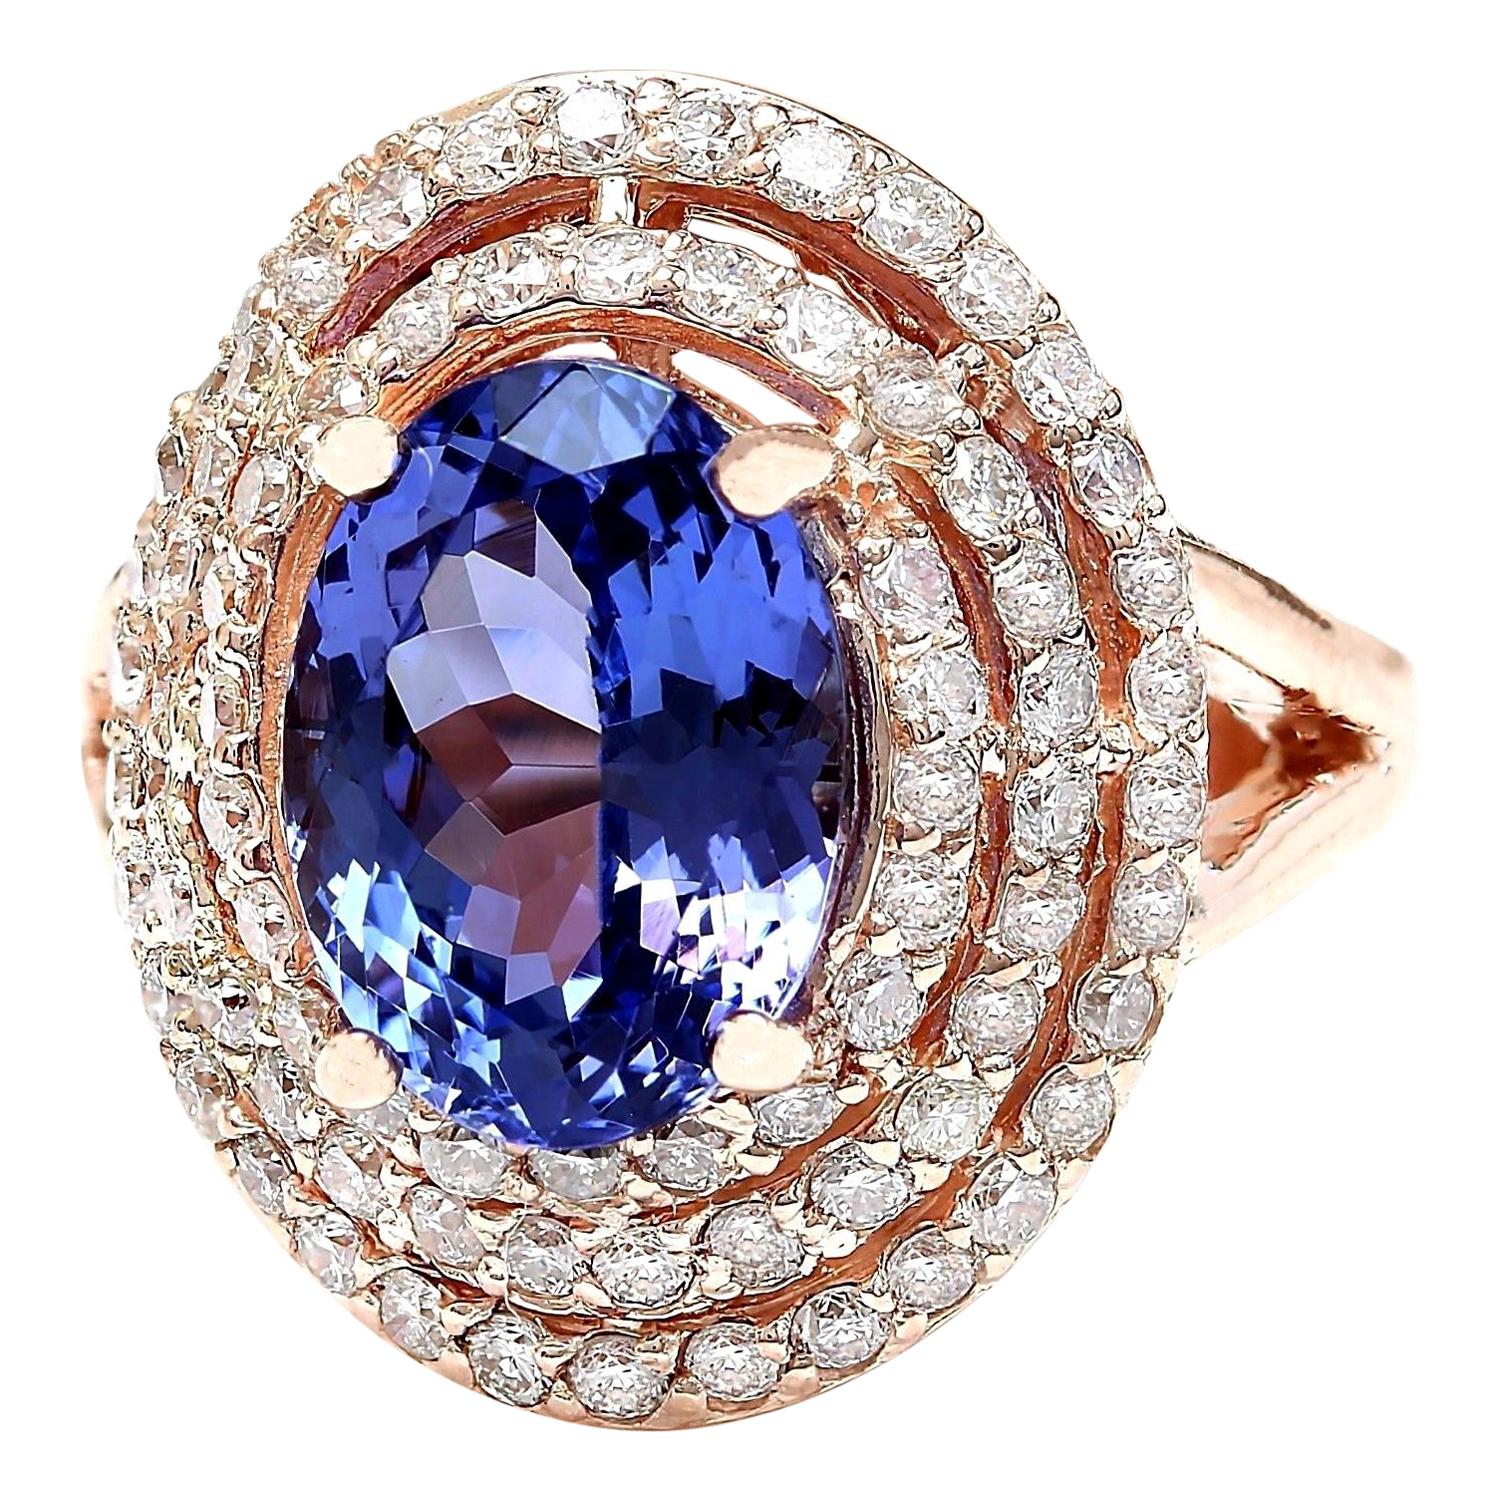 Introducing our stunning 5.33 Carat Natural Tanzanite 14K Solid Rose Gold Diamond Ring, a true masterpiece of elegance and allure. Crafted from lustrous 14K Rose Gold, this ring exudes sophistication and charm.
At the heart of this captivating ring